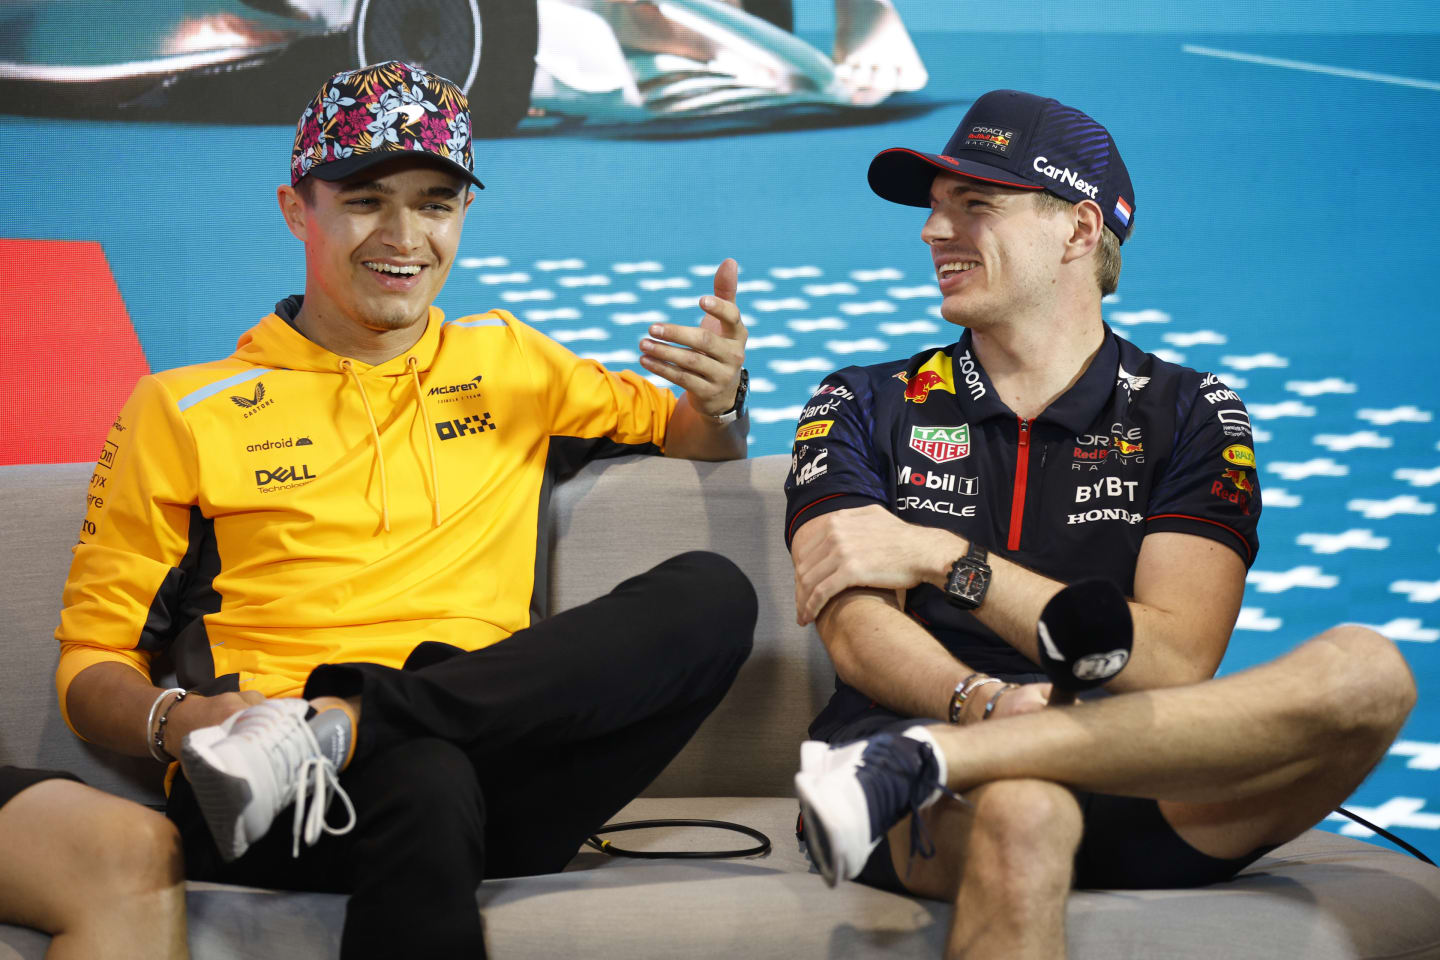 MIAMI, FLORIDA - MAY 04: Lando Norris of Great Britain and McLaren and Max Verstappen of the